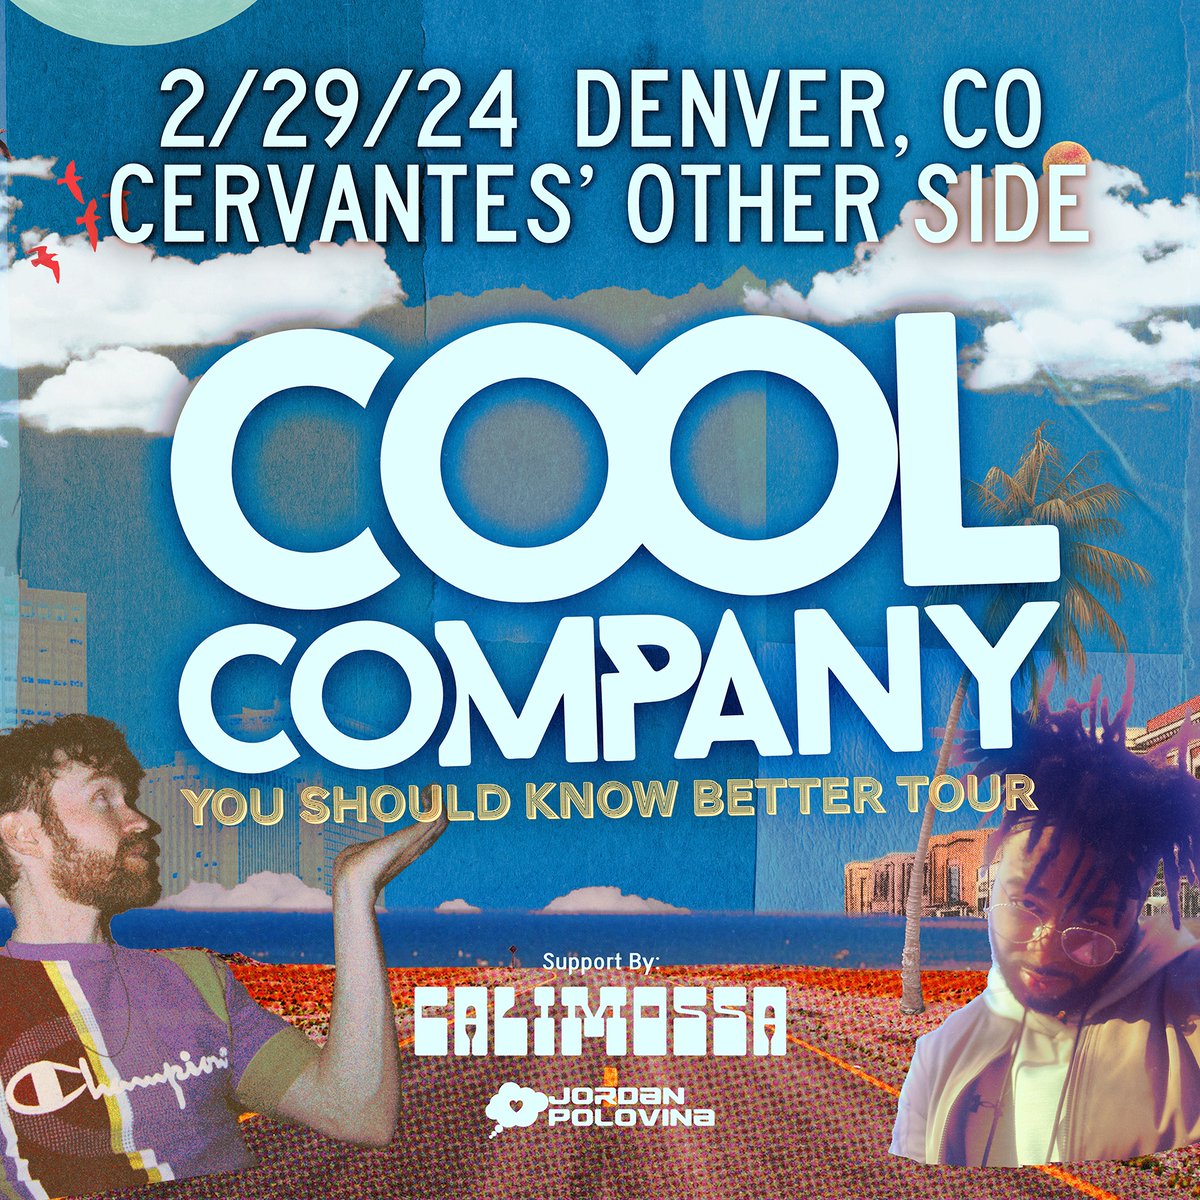 JUST ANNOUNCED! Cool Company is coming to Cervantes' Other Side on February 29th for their 'You Should Know Better' Tour 🎉 Support from Calimossa and Jordan Polovina. Tickets on sale now!

Tixs: etix.com/ticket/p/50669…